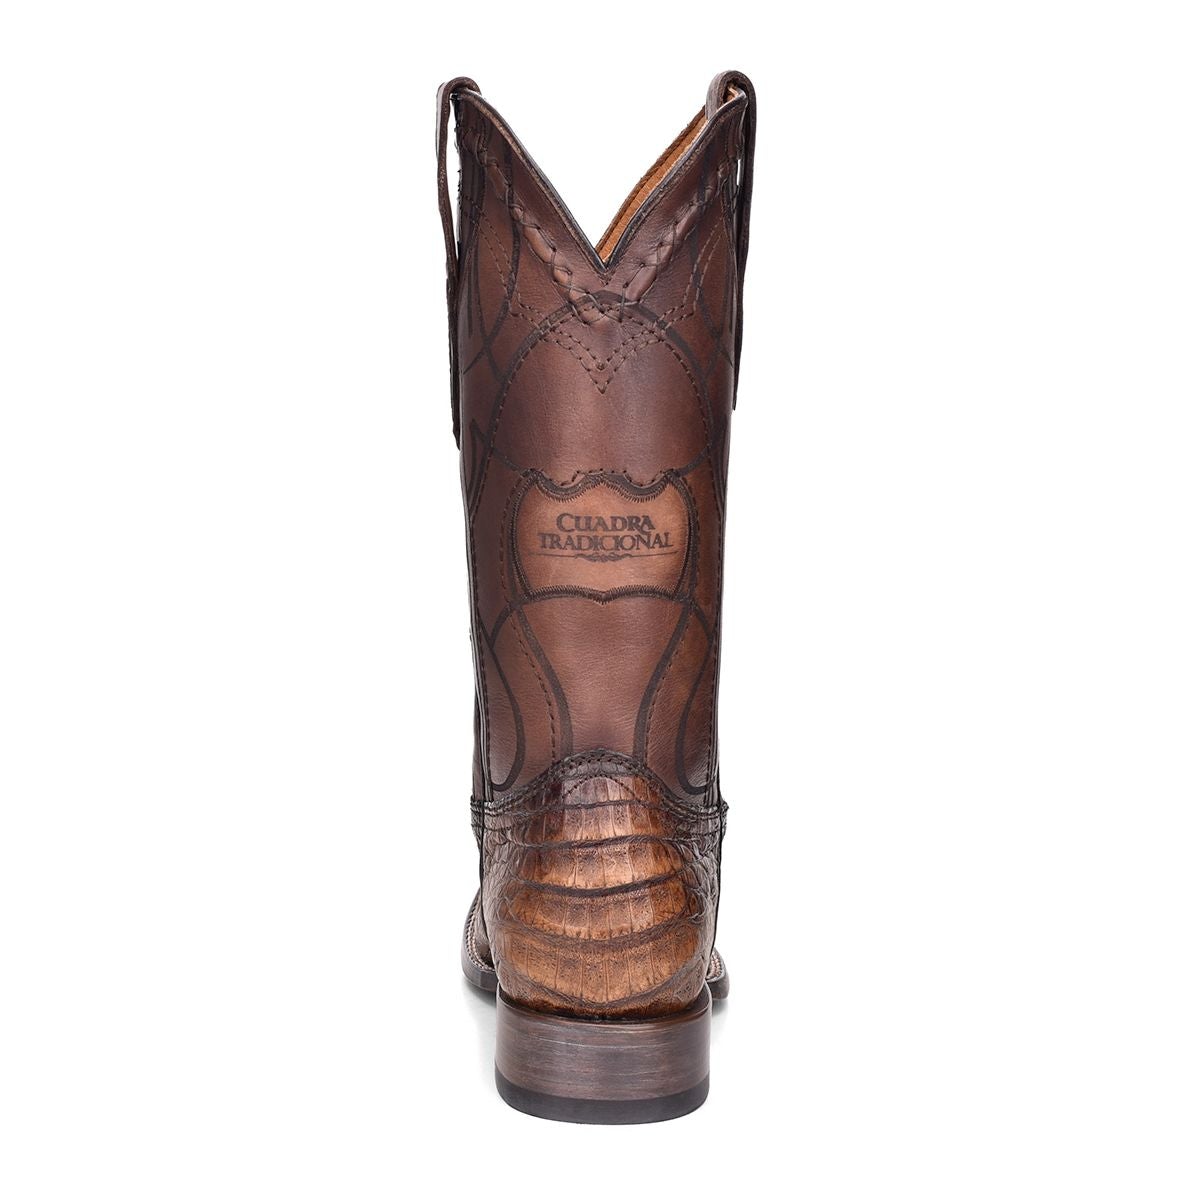 3Z1OFY - Cuadra maple cowboy rodeo caiman belly leather boots for men-Kuet.us